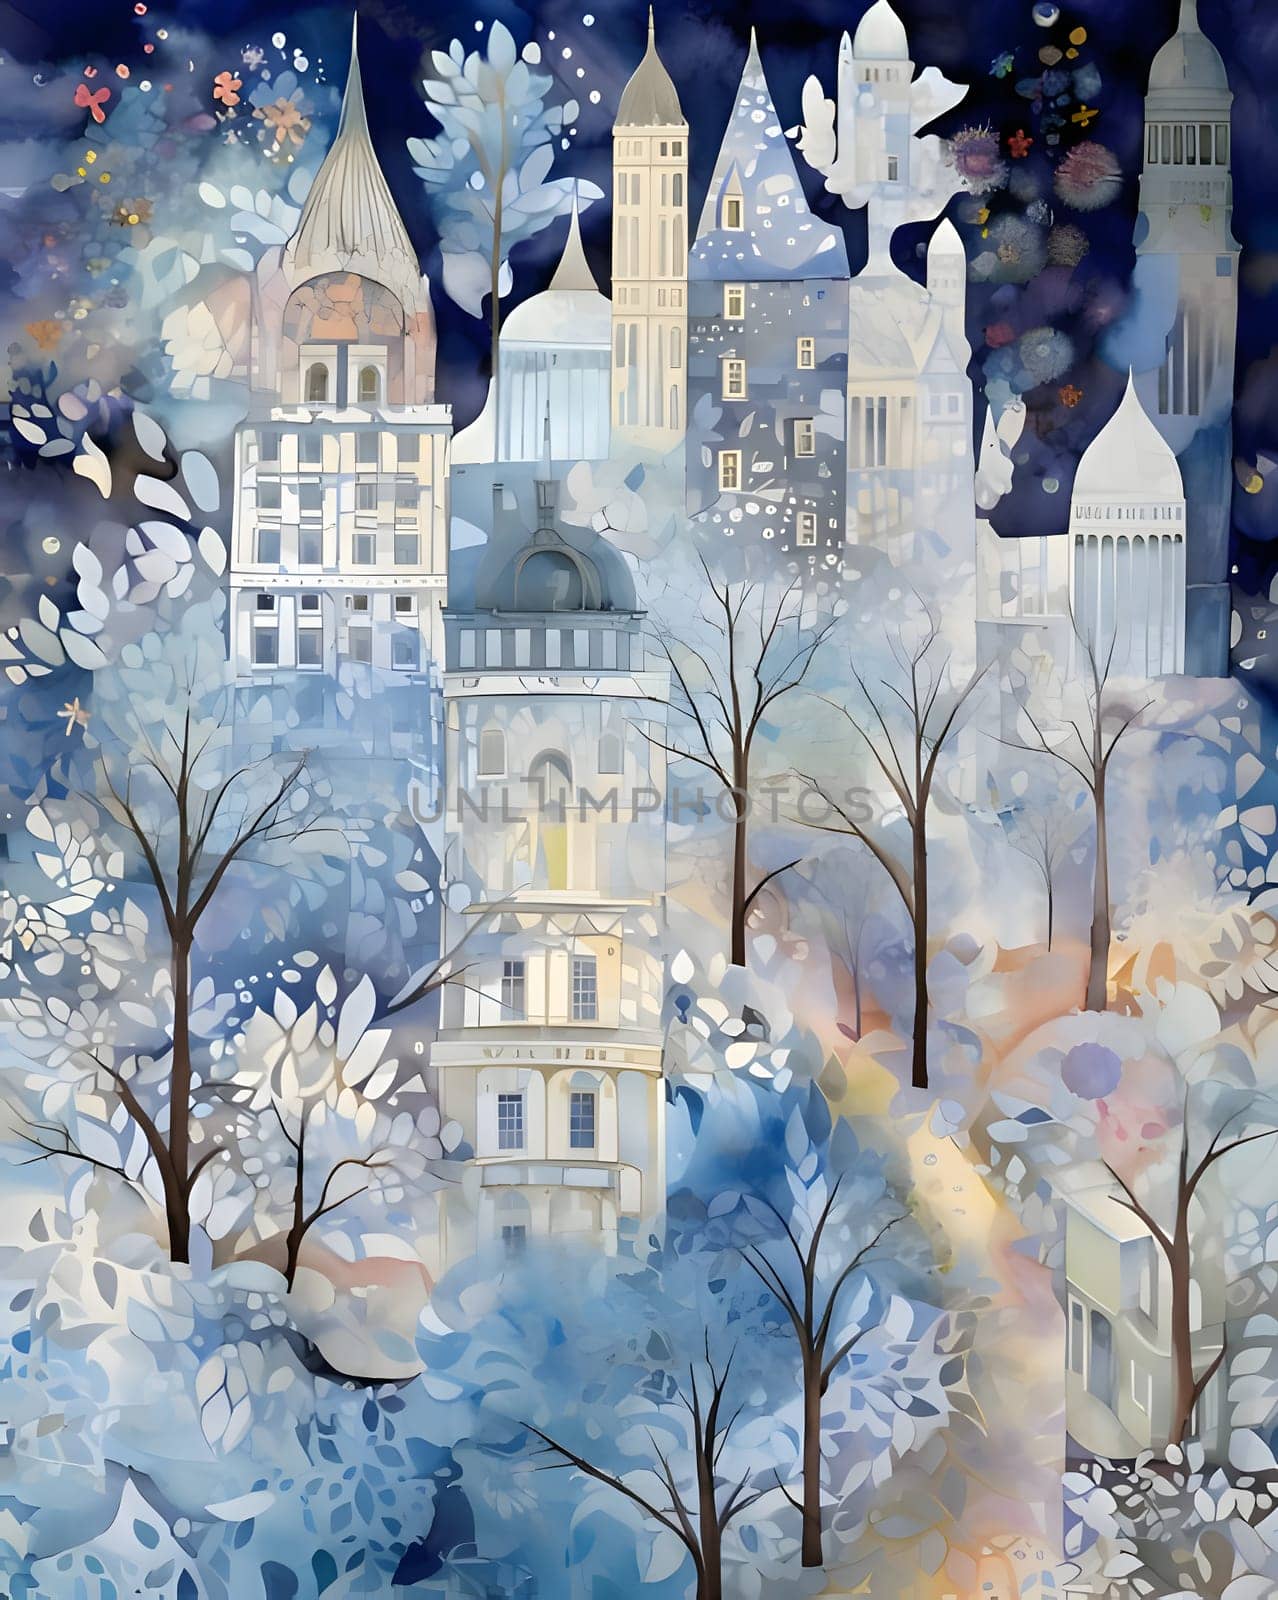 Patterns and banners backgrounds: Winter landscape with houses, trees and snowflakes. Watercolor illustration.